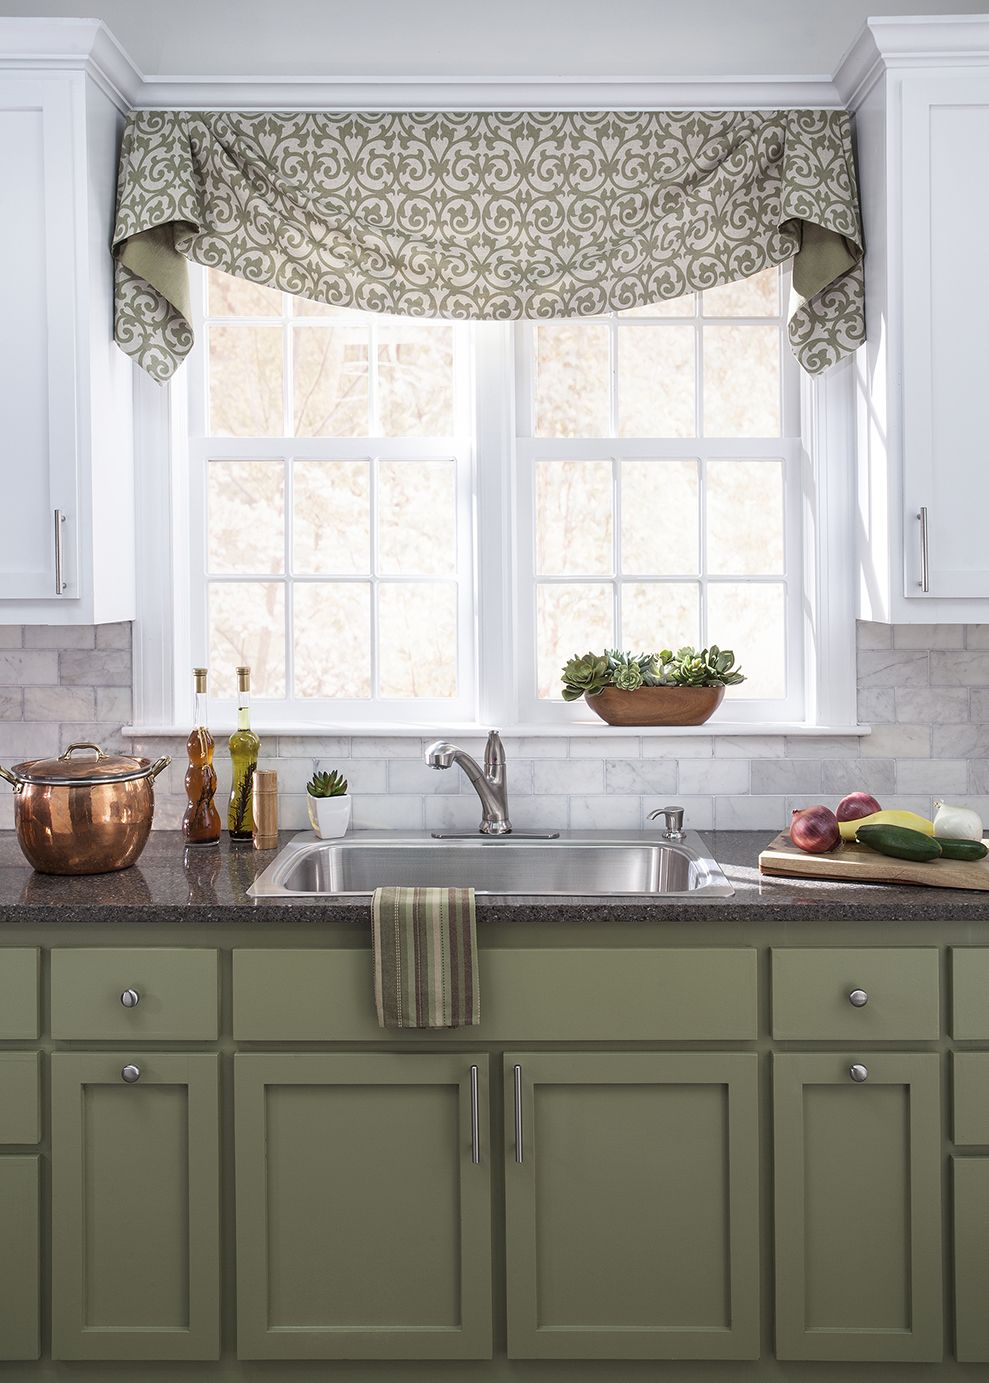 Flowing fabrics and coordinating colors are a win in this gorgeous #trendy  kitchen.